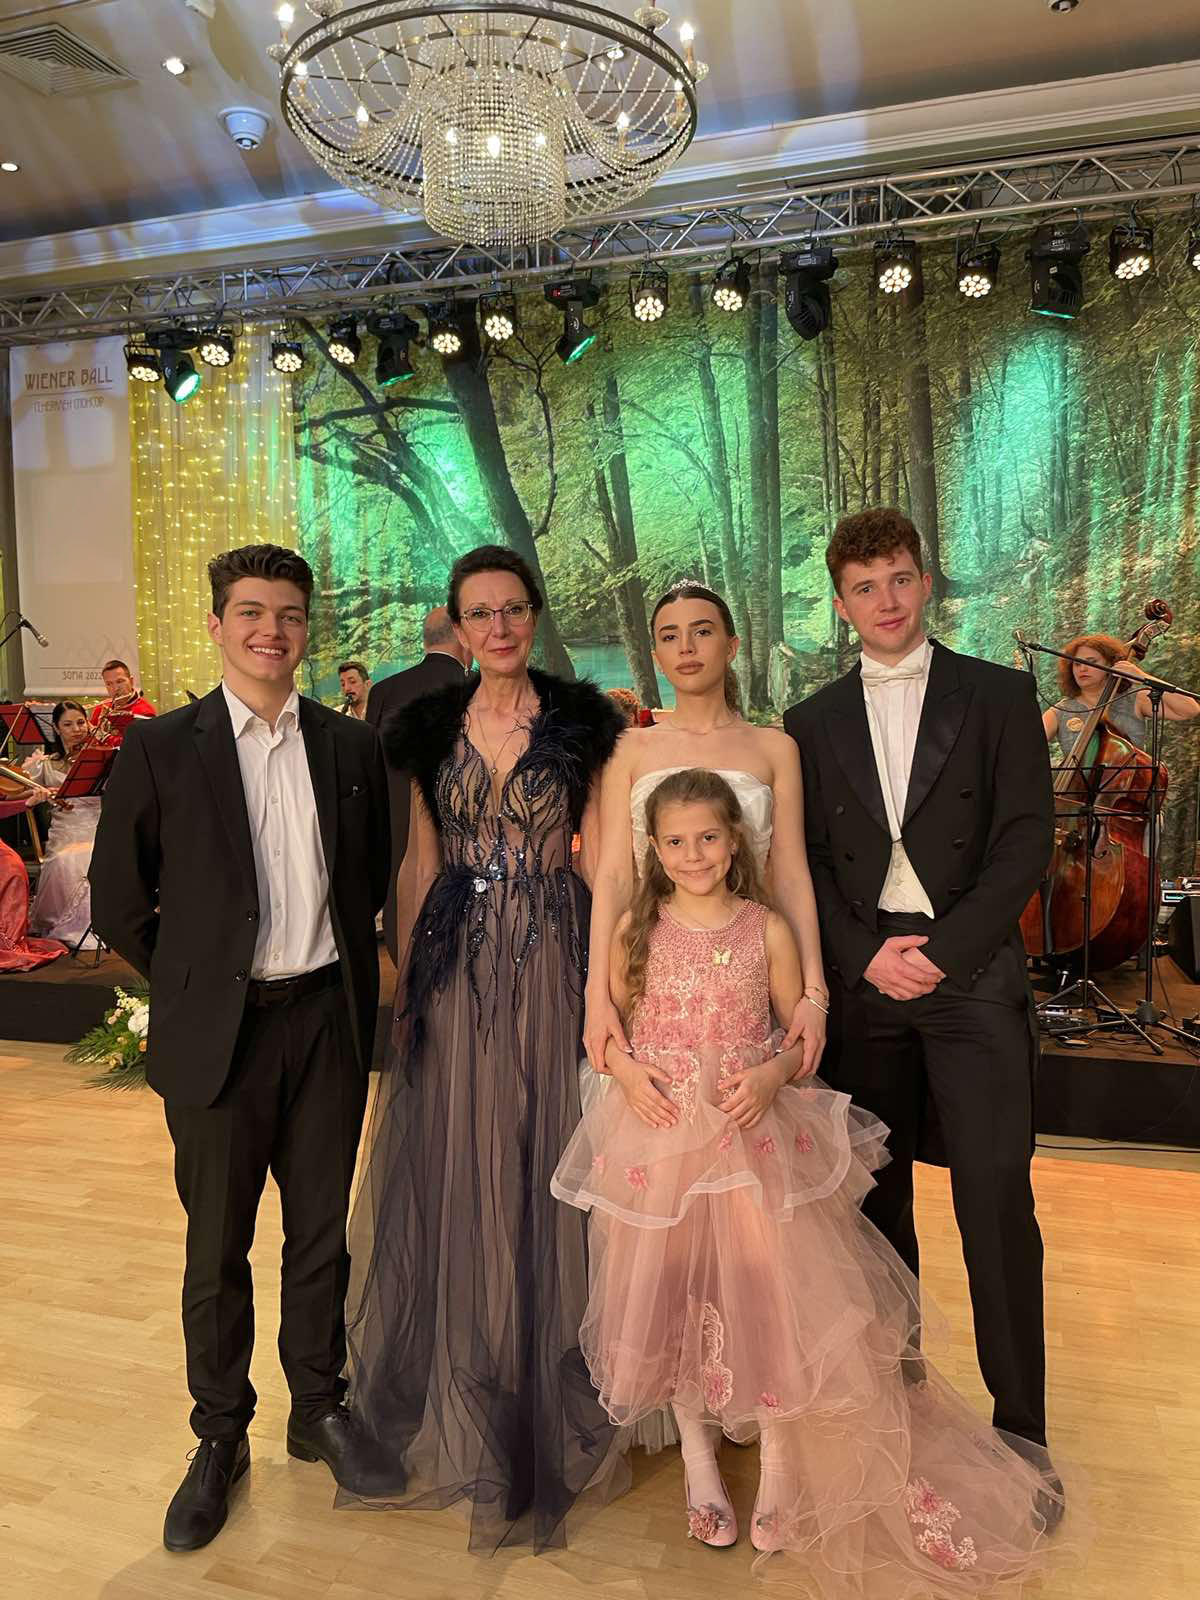 Viennese fundraising ball with a cause